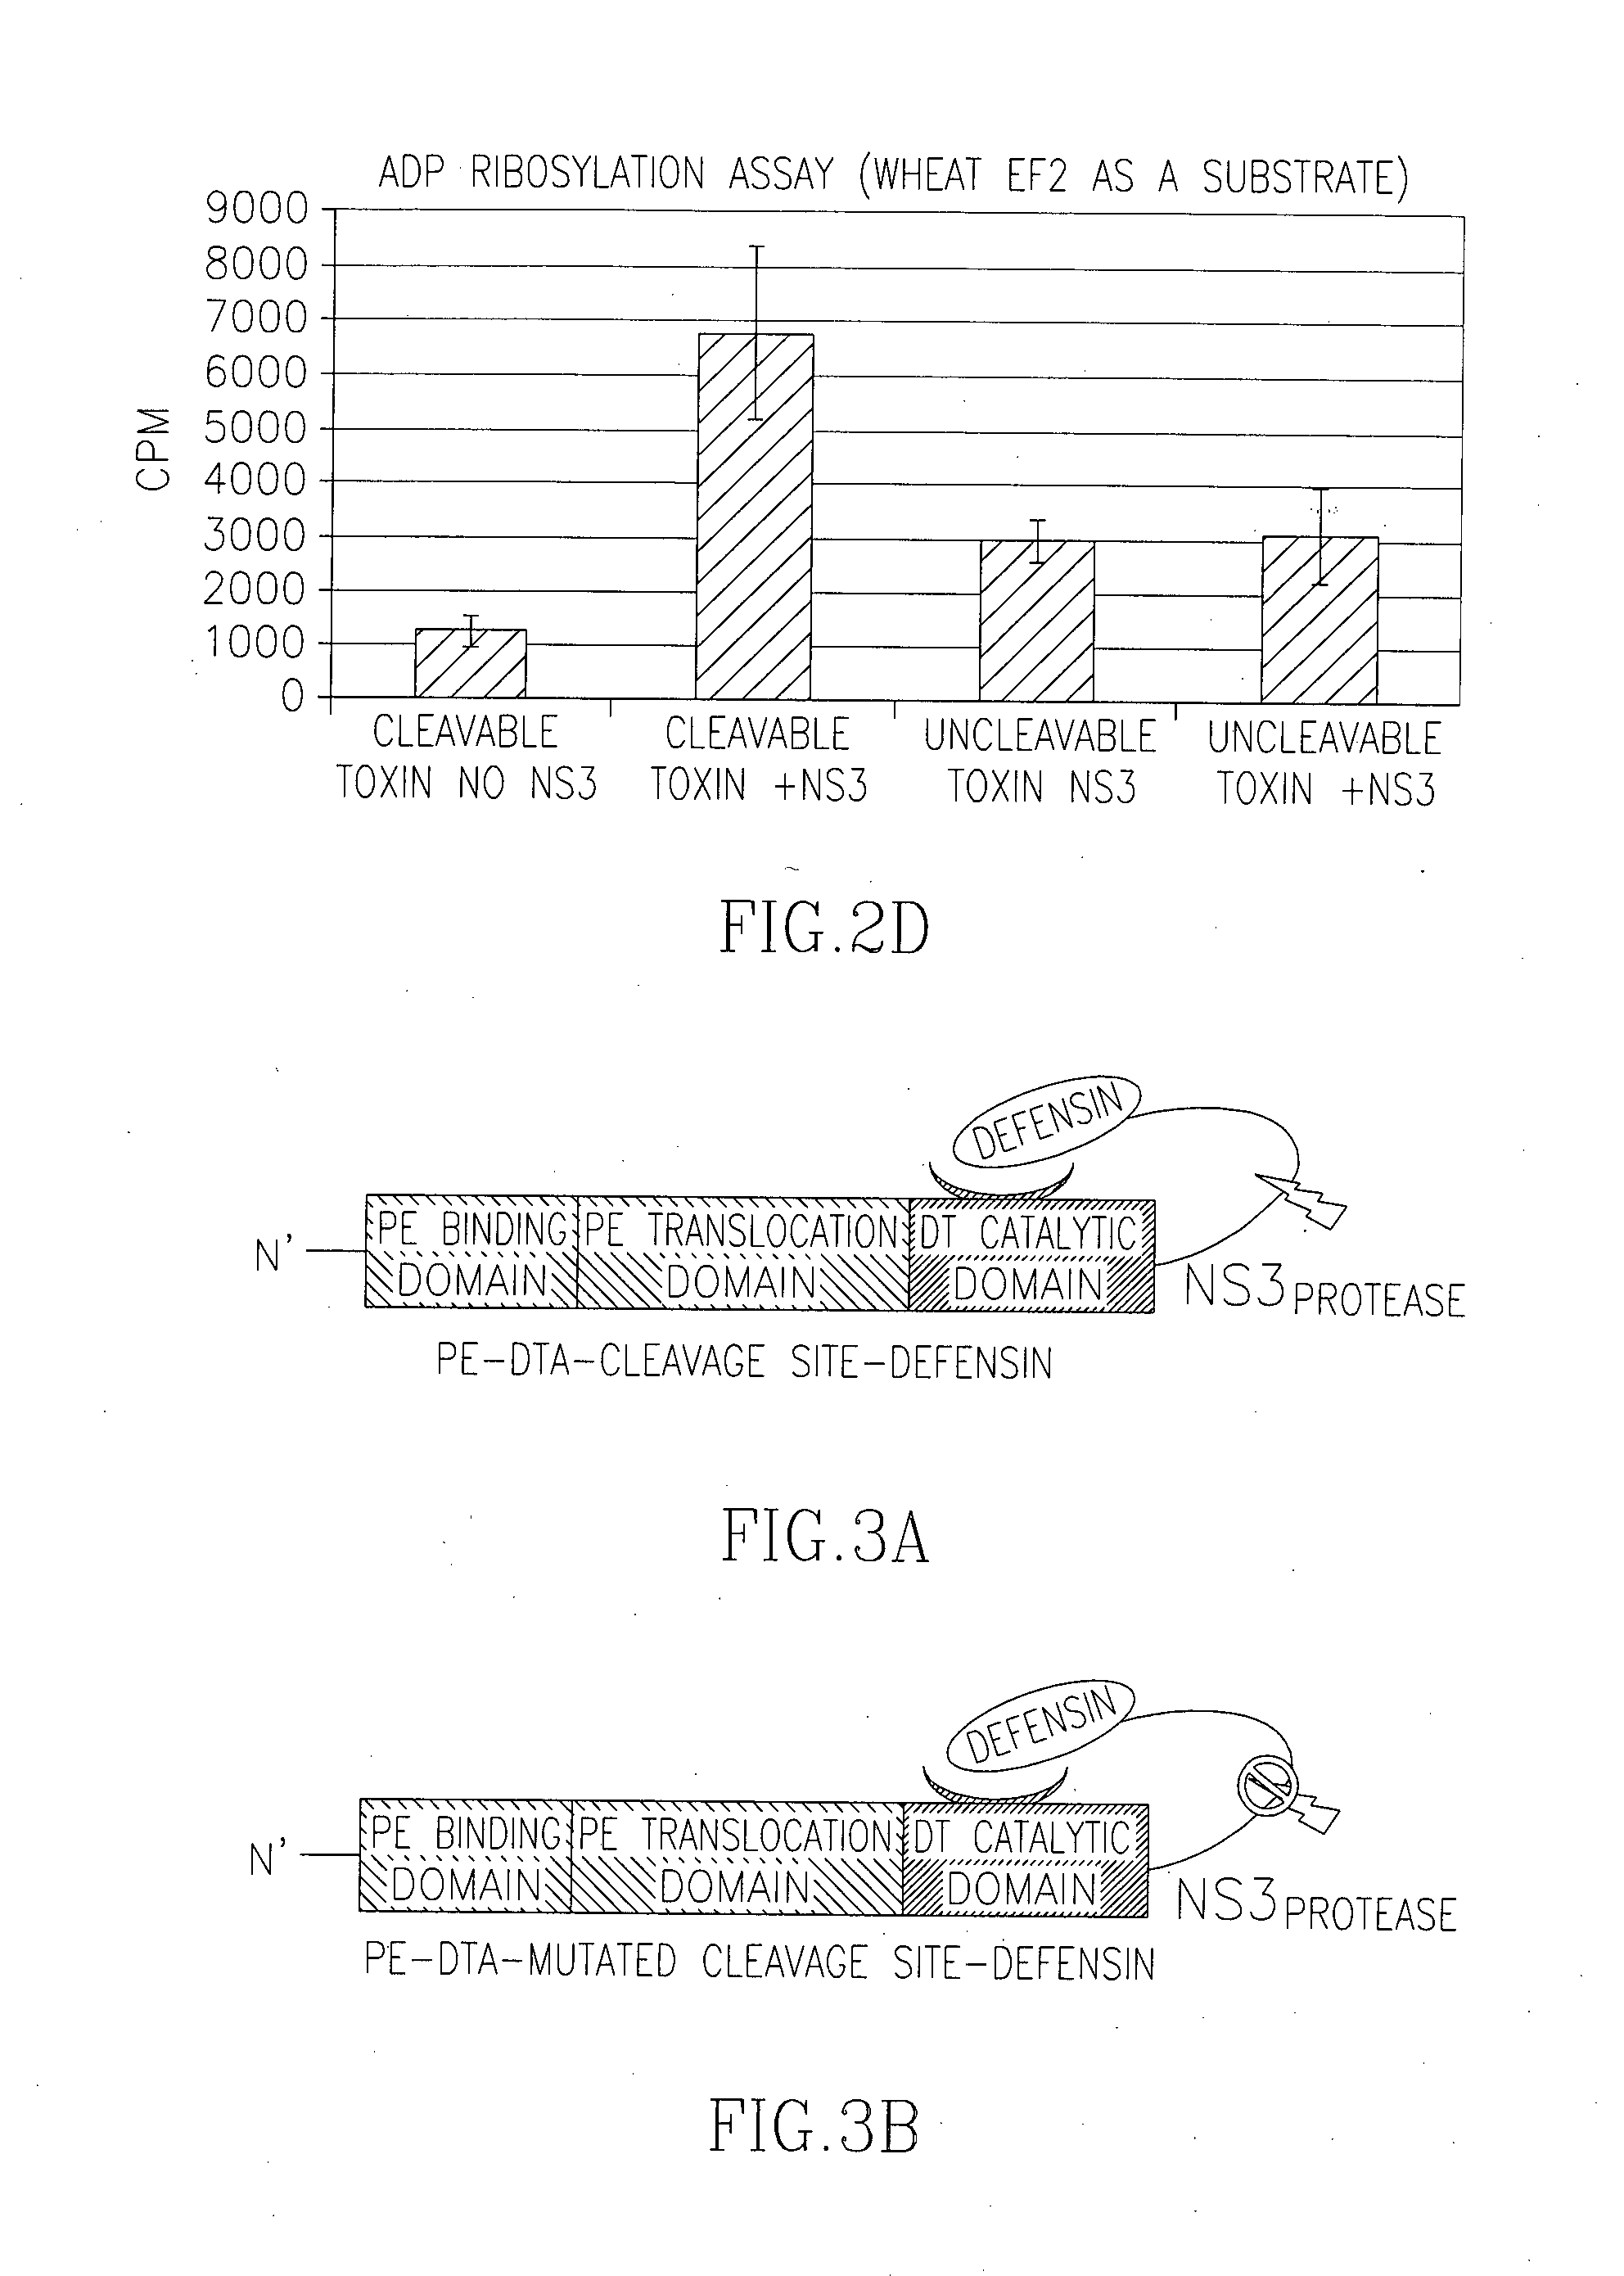 Activatable toxin complexes comprising a cleavable inhibitory peptide